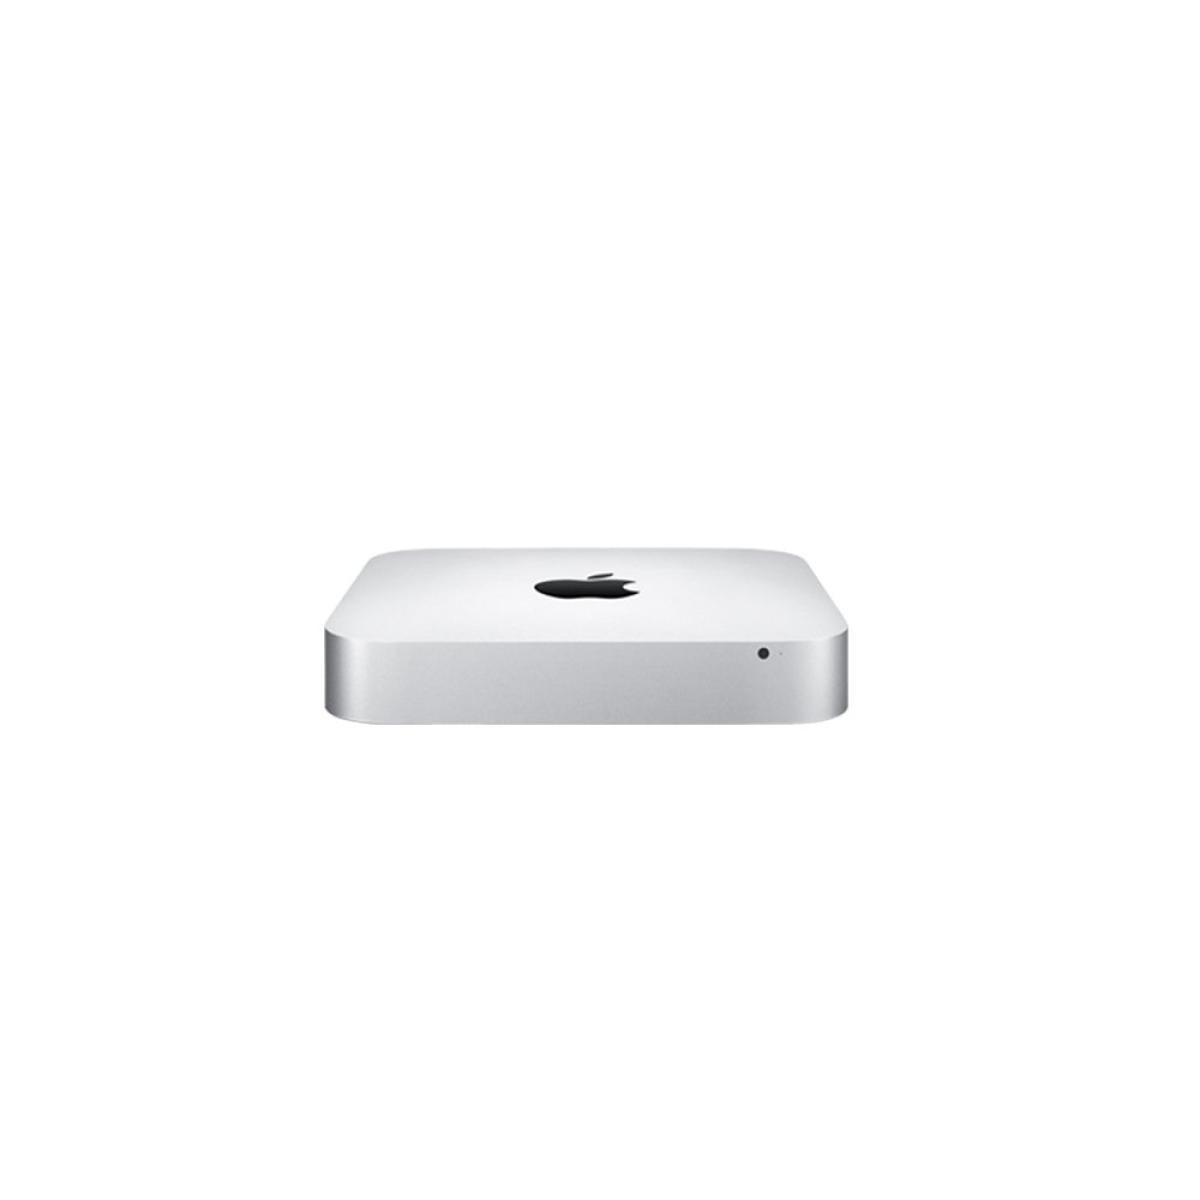 PC Fixe Apple Mac Mini 2012 i7 2,6 Ghz 16 Go 1 To HDD Reconditionné